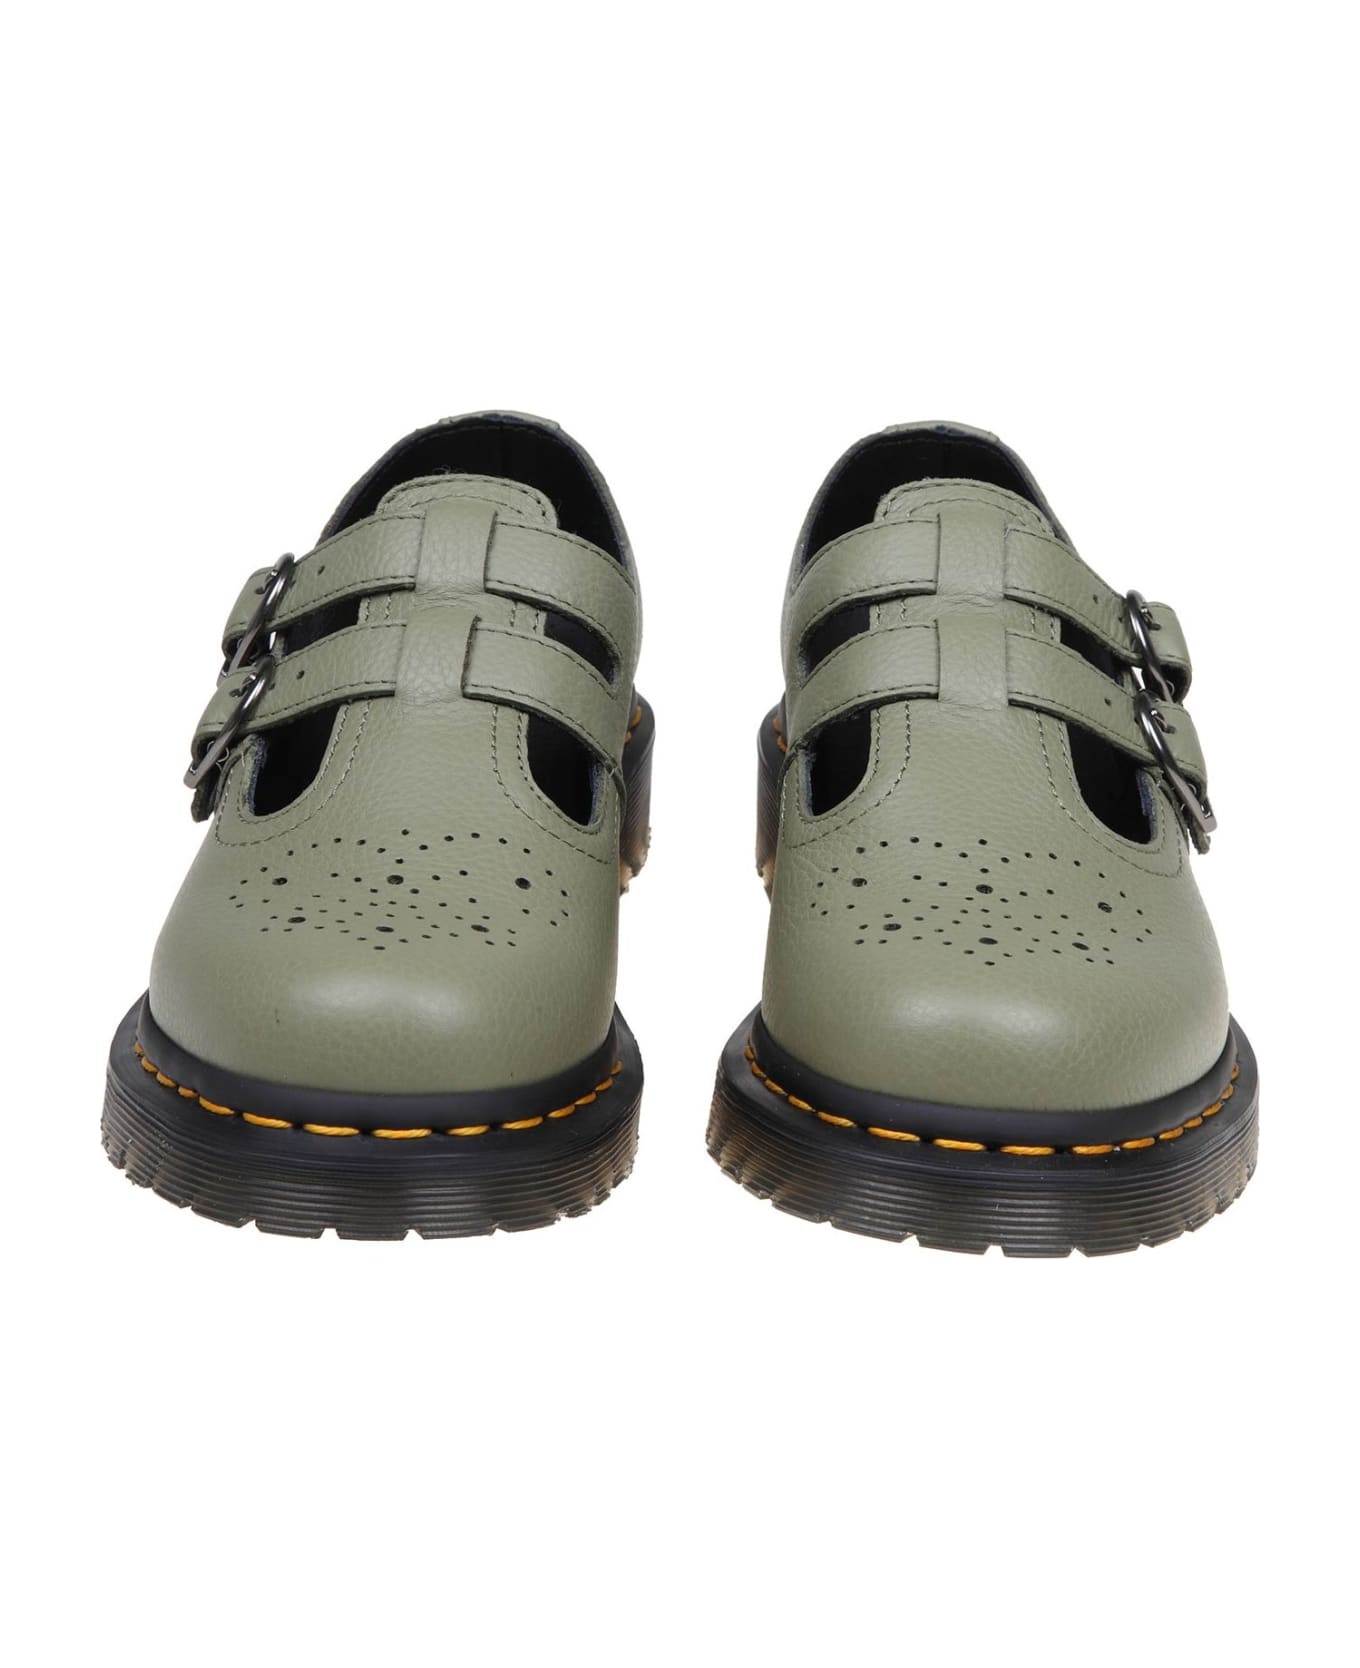 Dr. Martens 8065 Mary Jane Shoe In Olive Green Leather - Olive